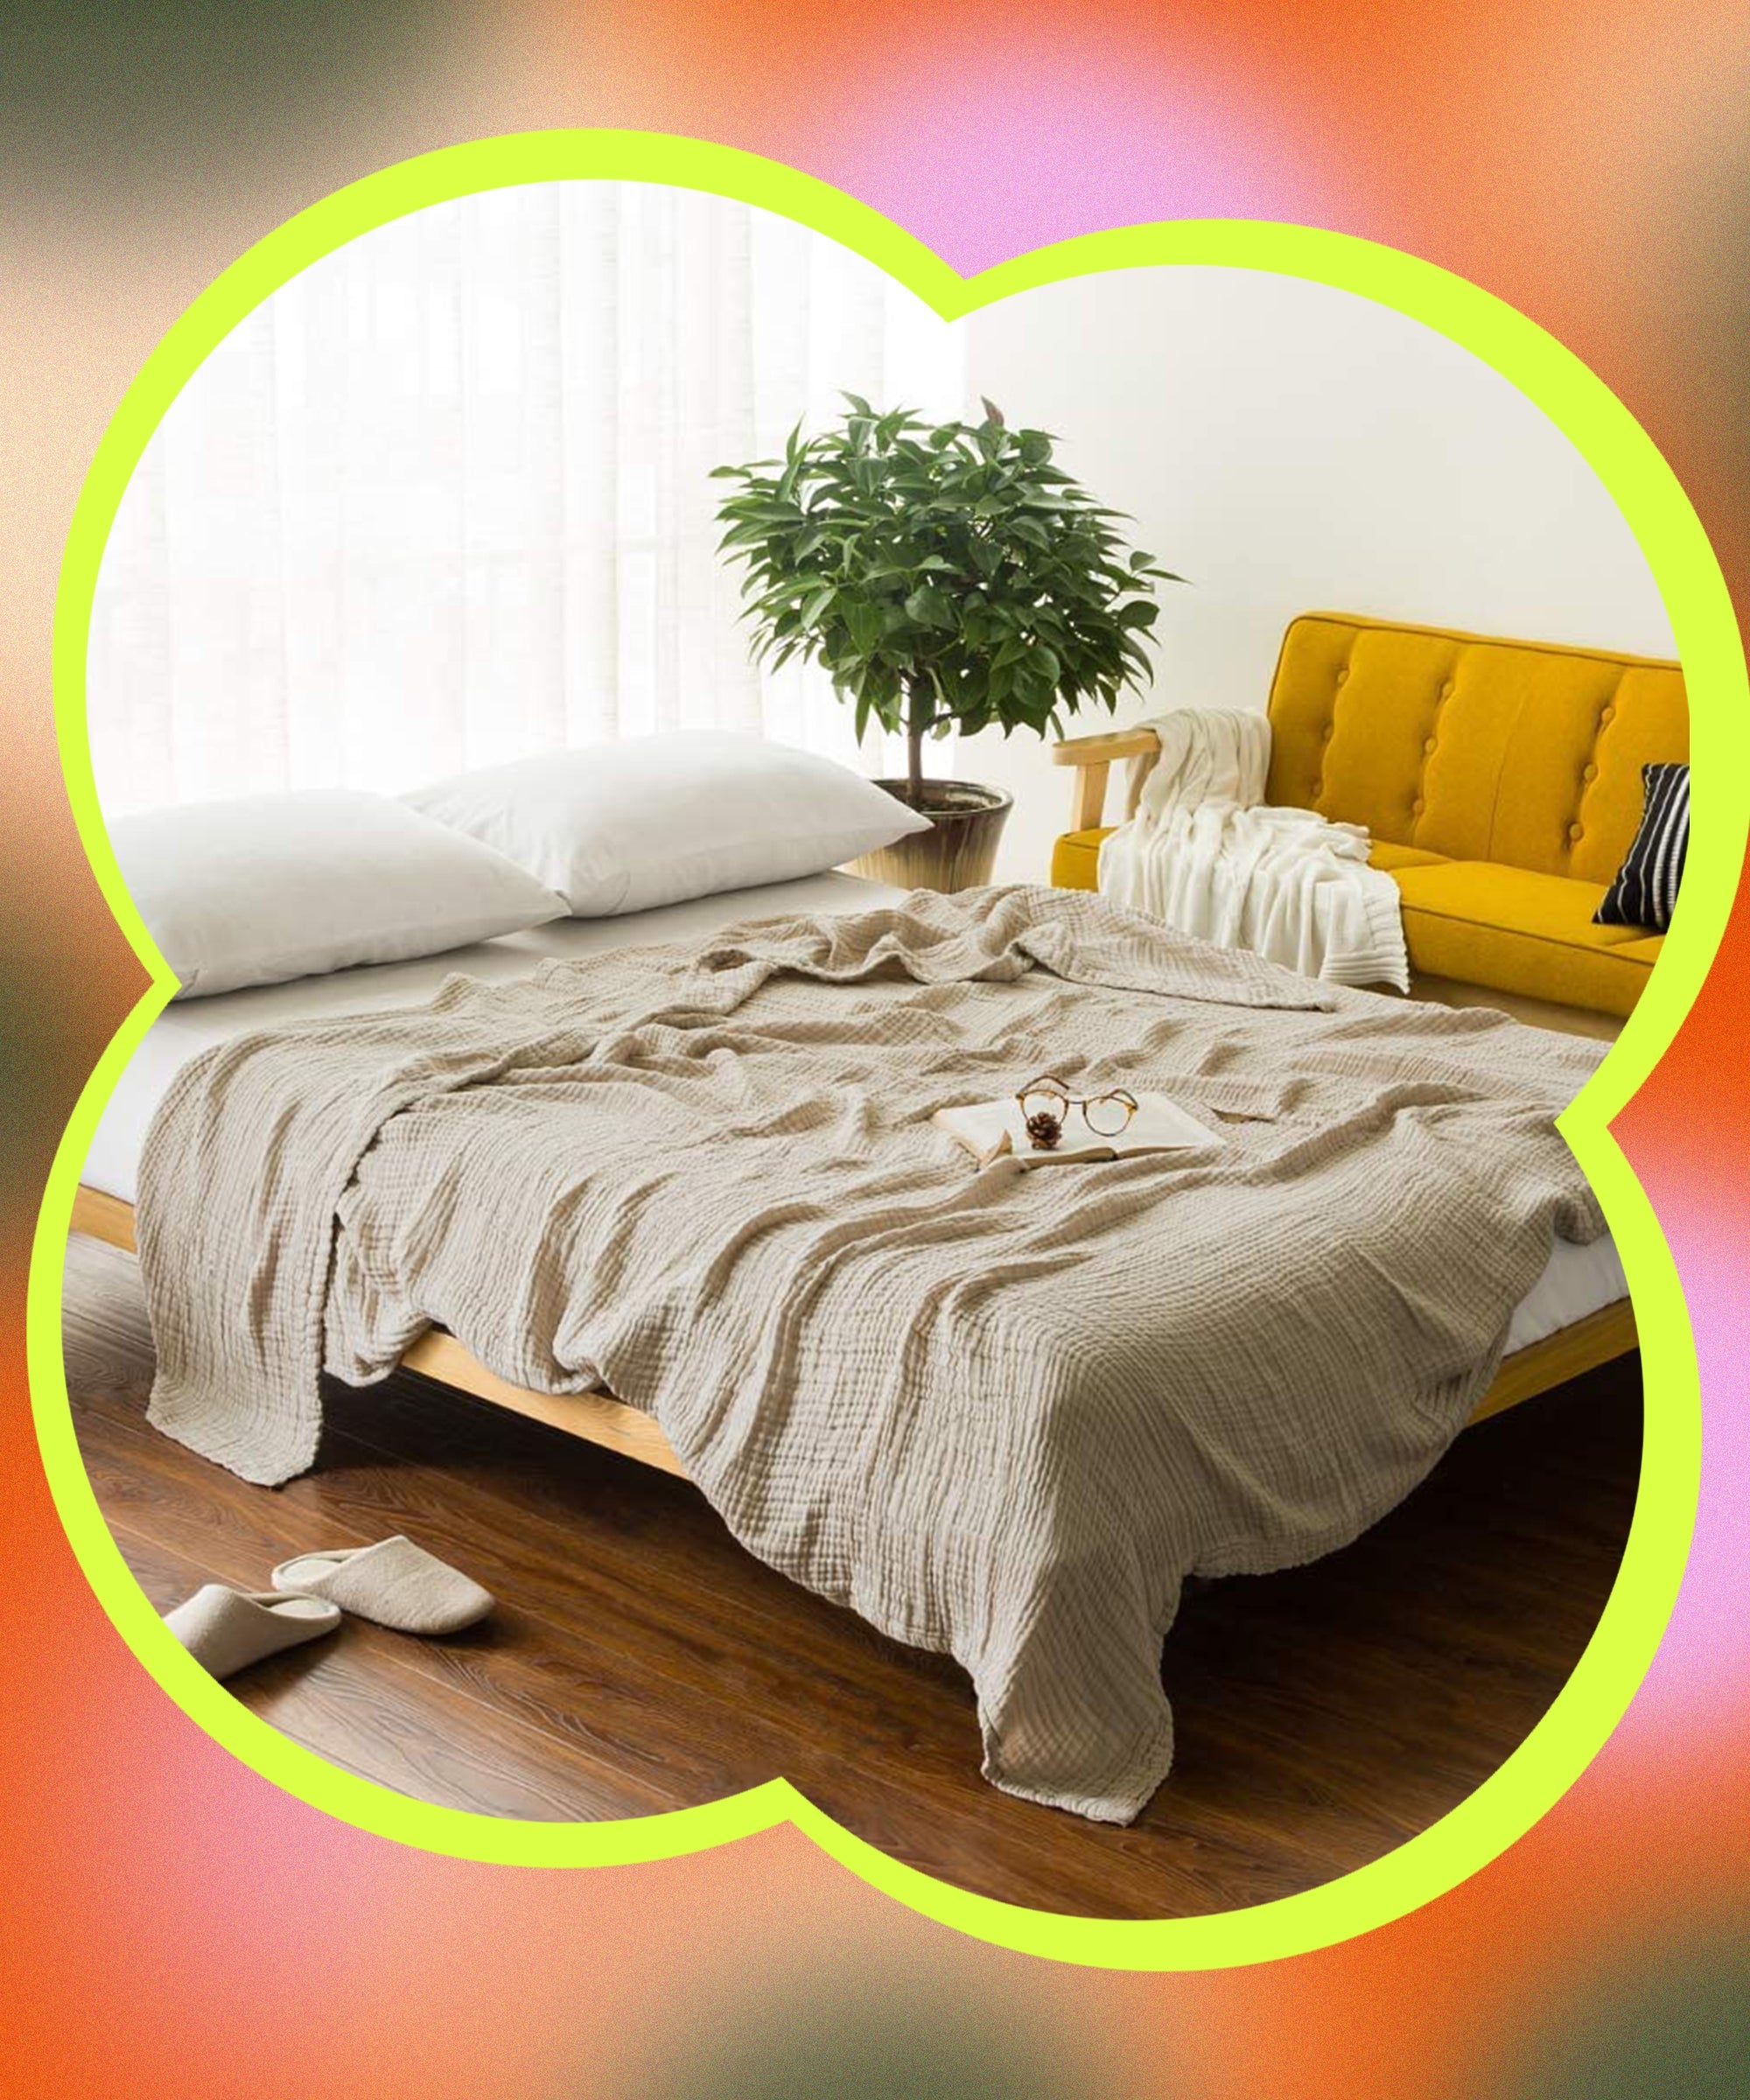 Queen Size Blanket Dimensions: Parachute Home